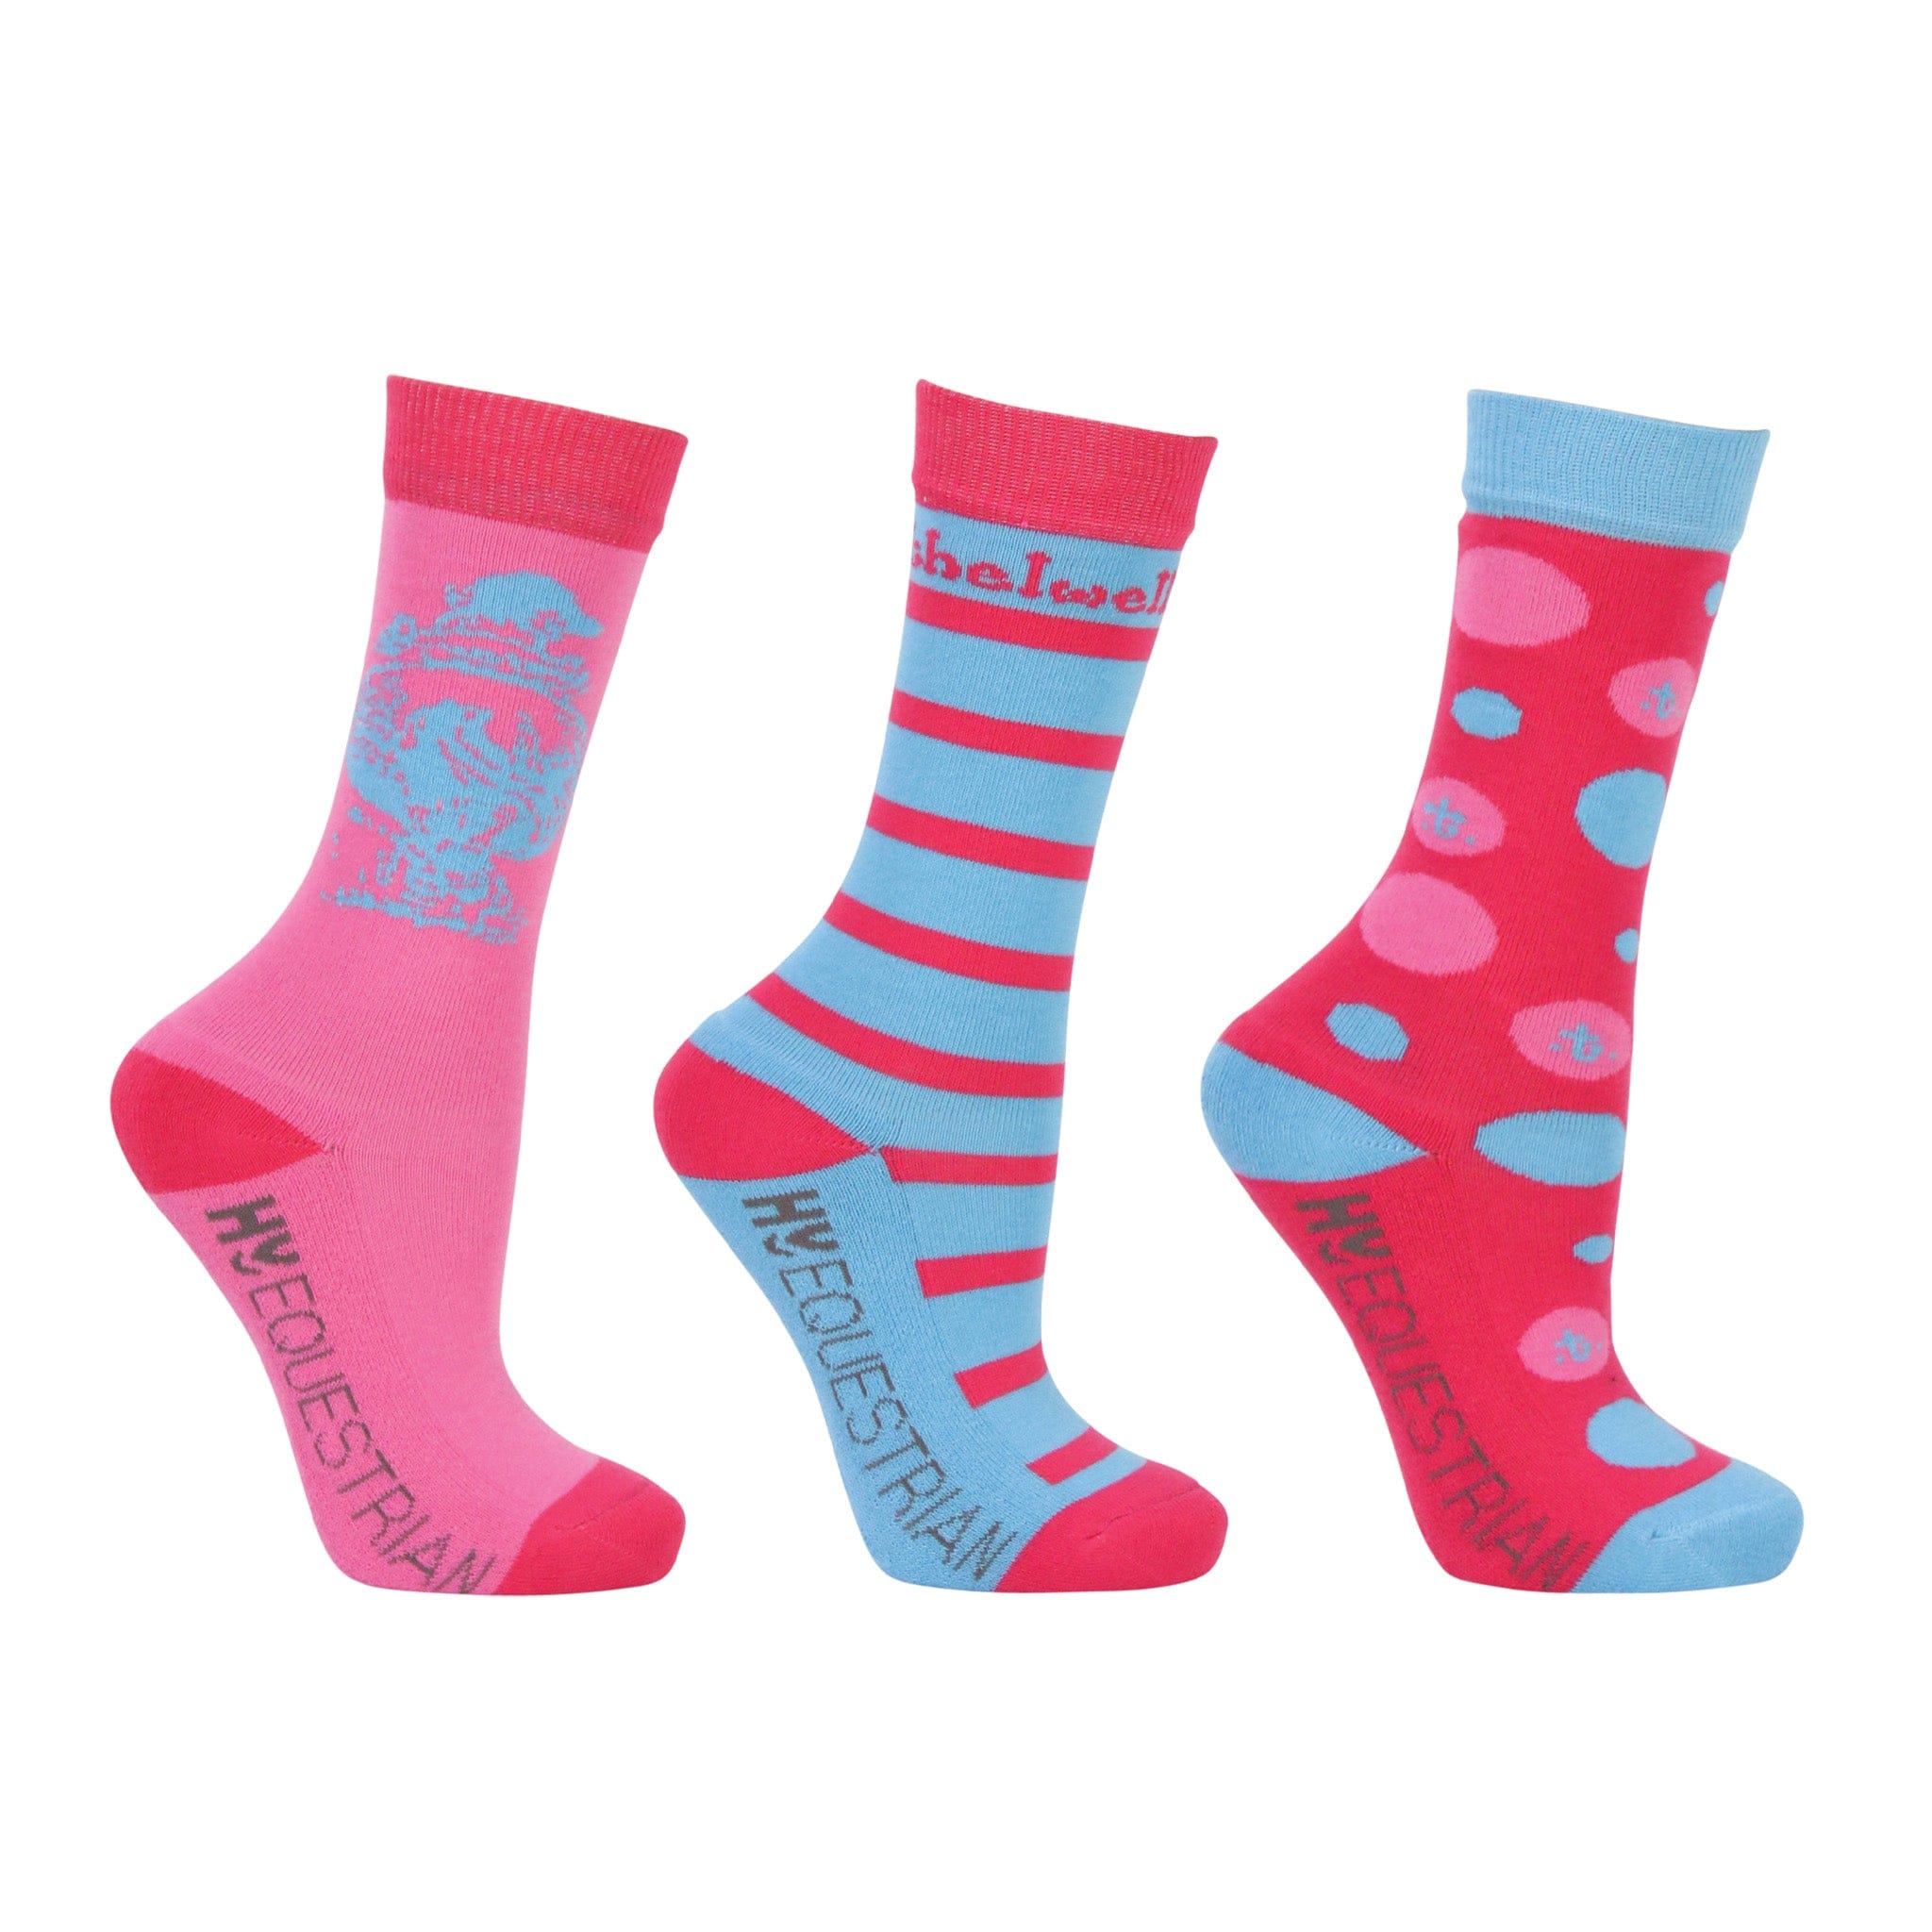 Hy Equestrian Children's Thelwell All Rounder Socks 3 Pack 32011 Pink, Hot Pink and Blue